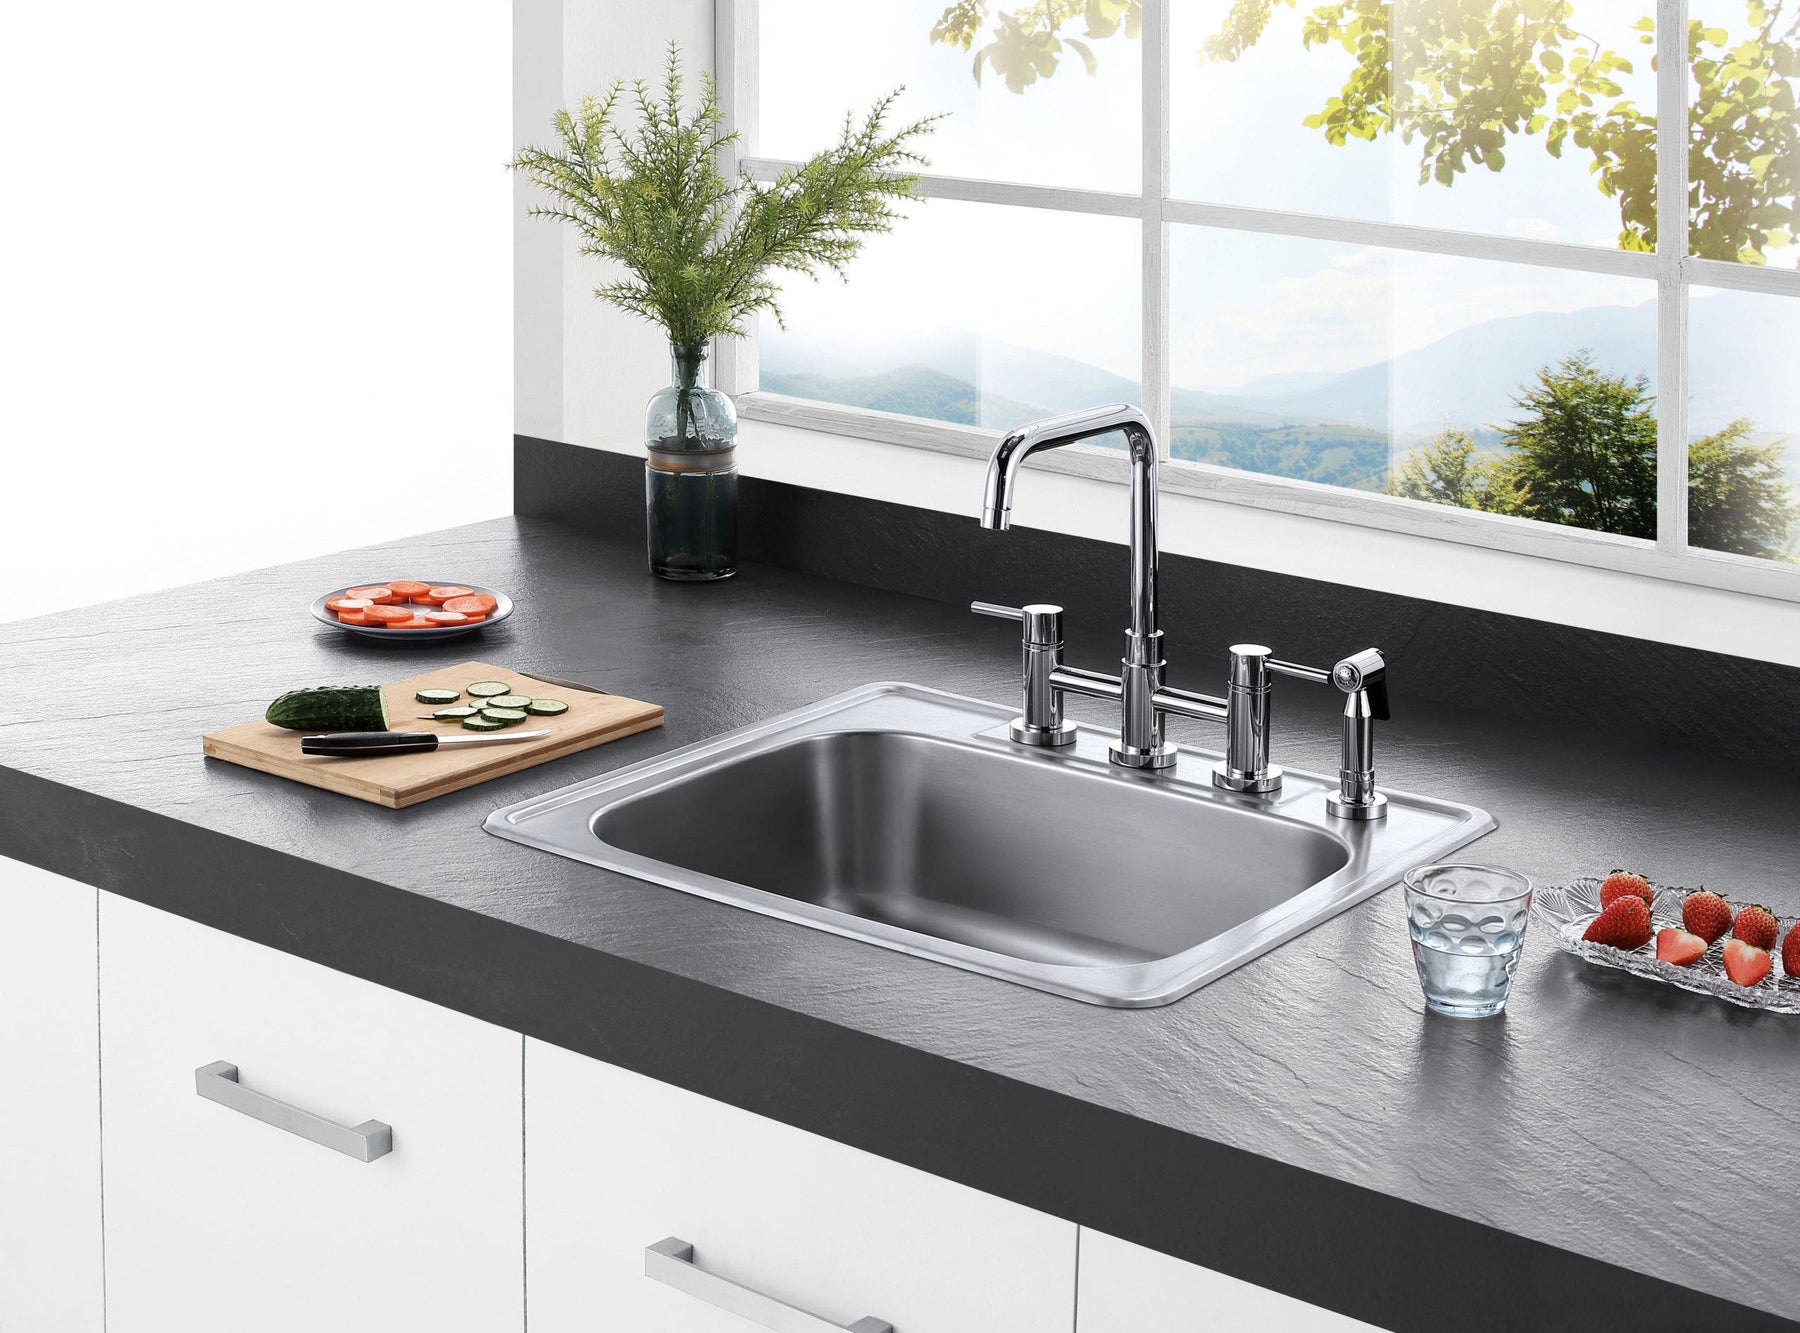 What Kitchen Sinks Are Trending Now?